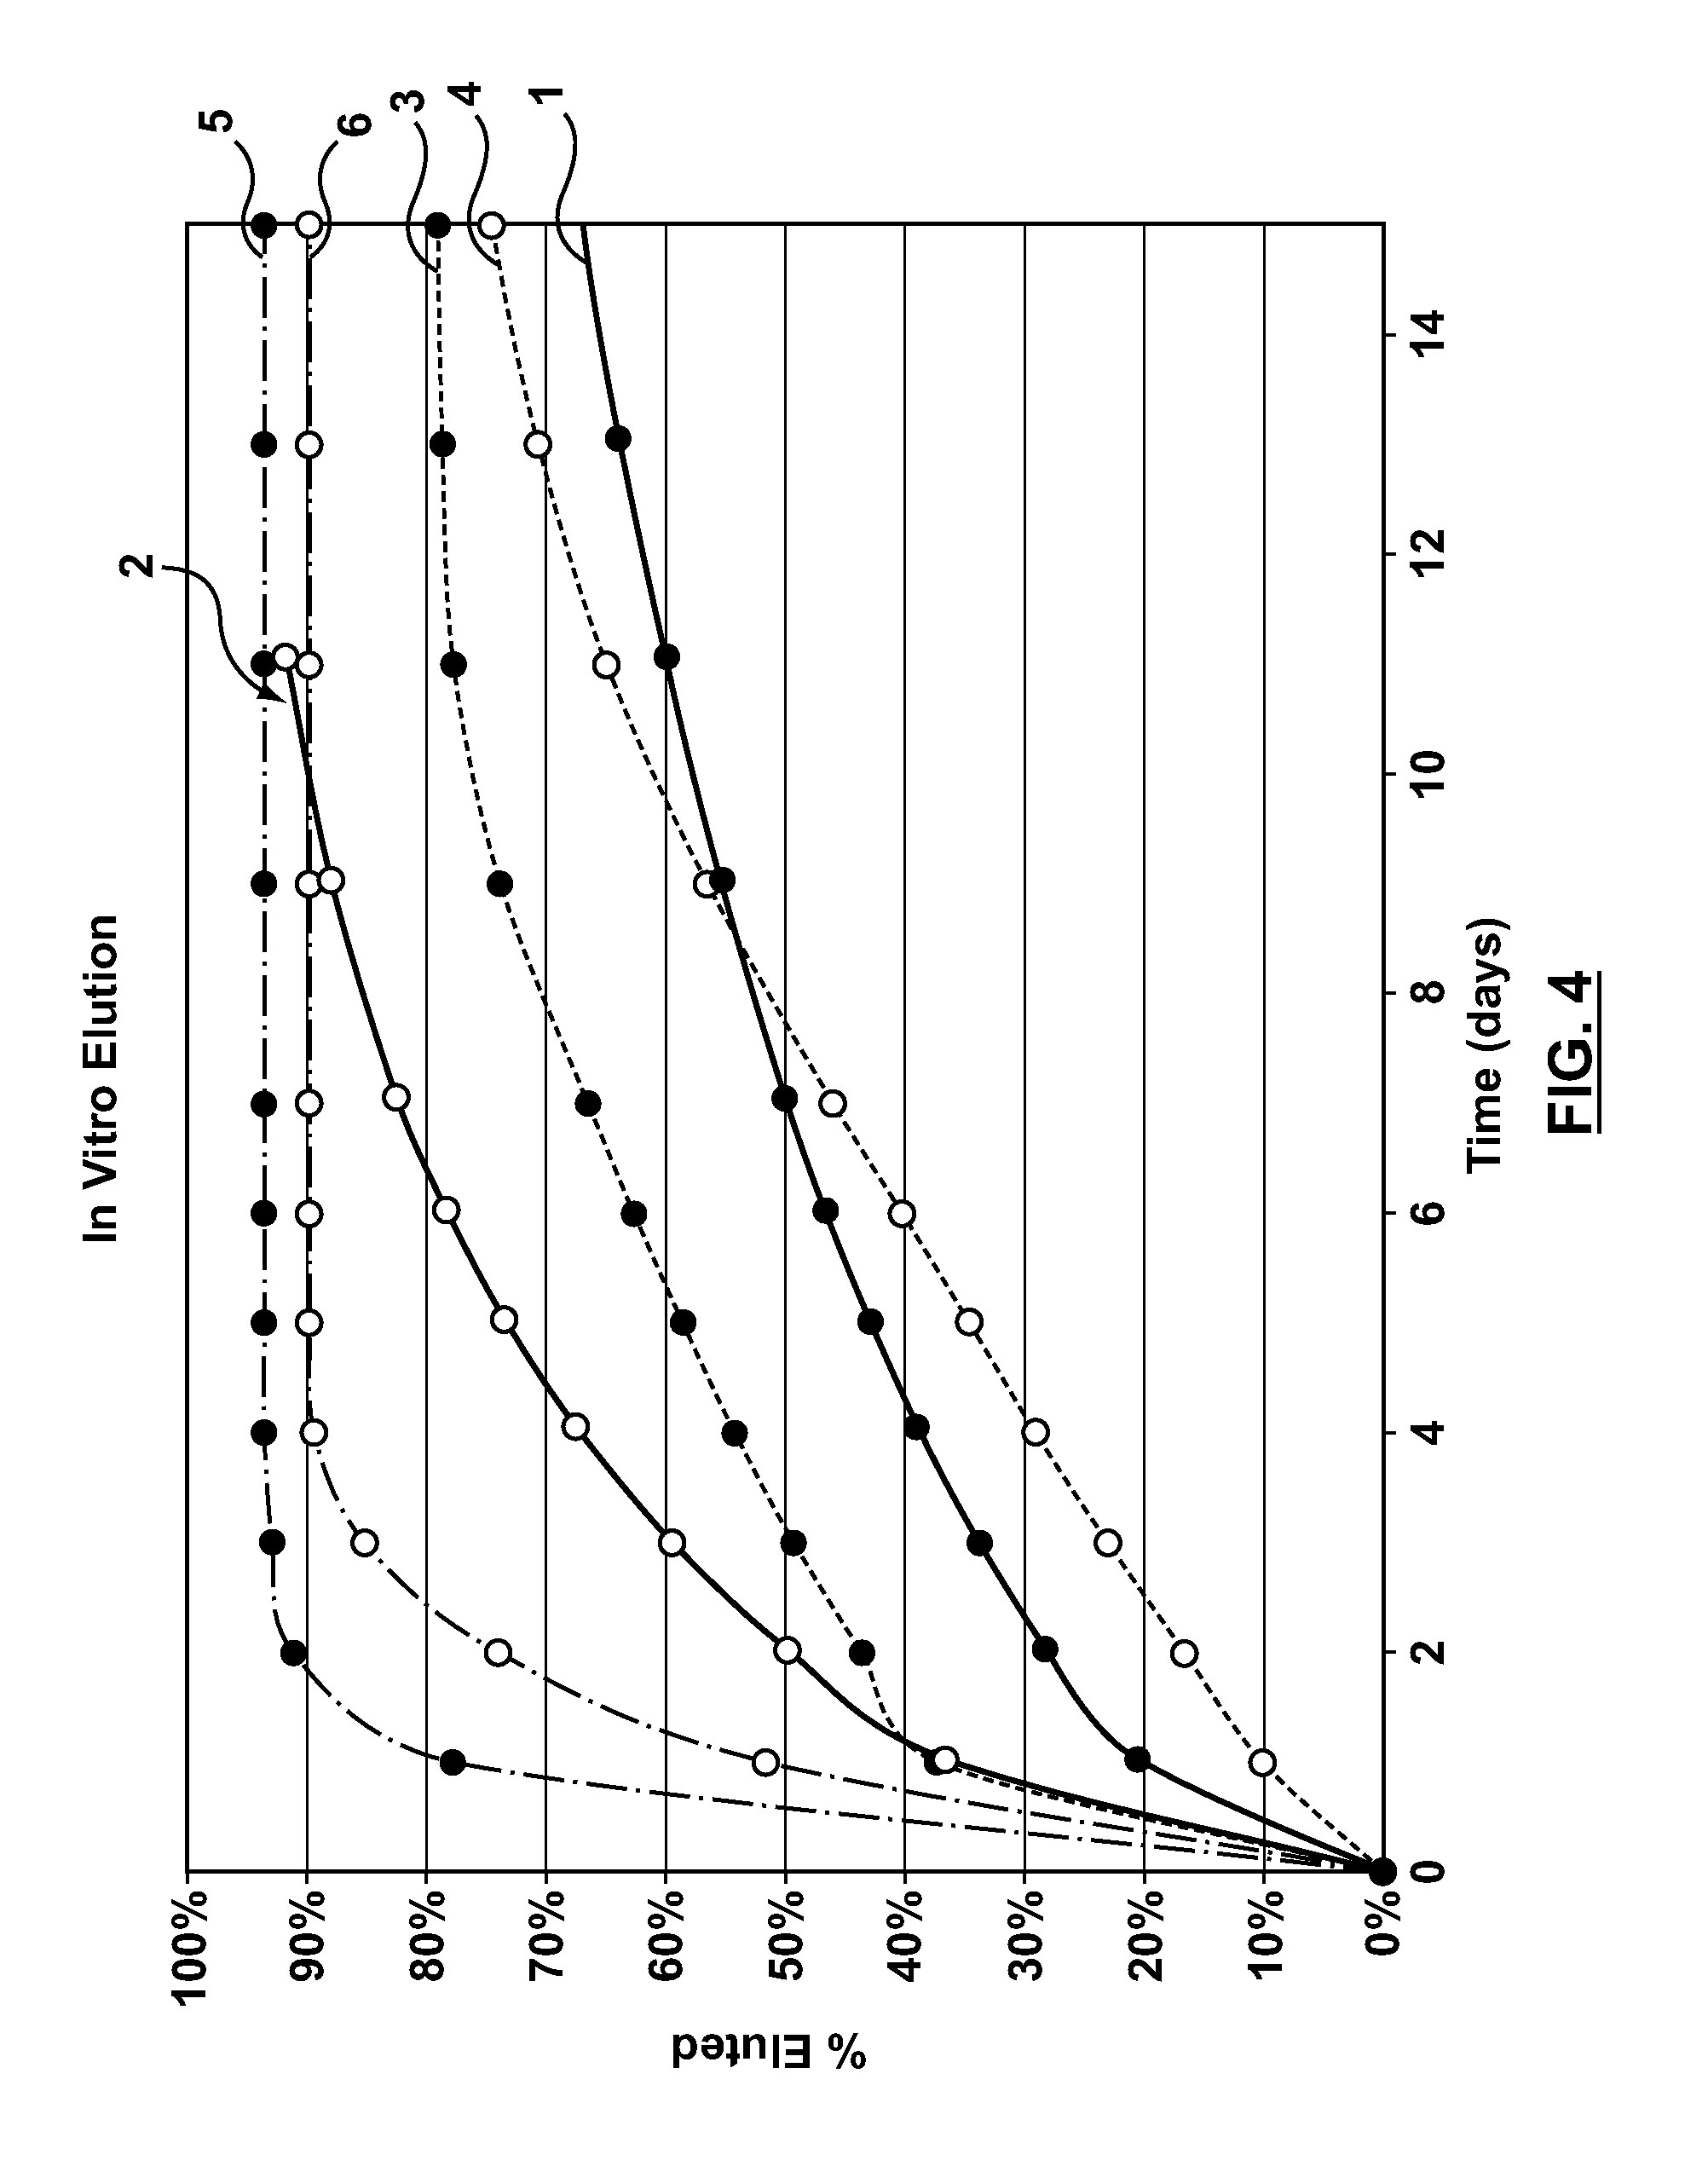 Apparatus and Methods for Loading a Drug Eluting Medical Device